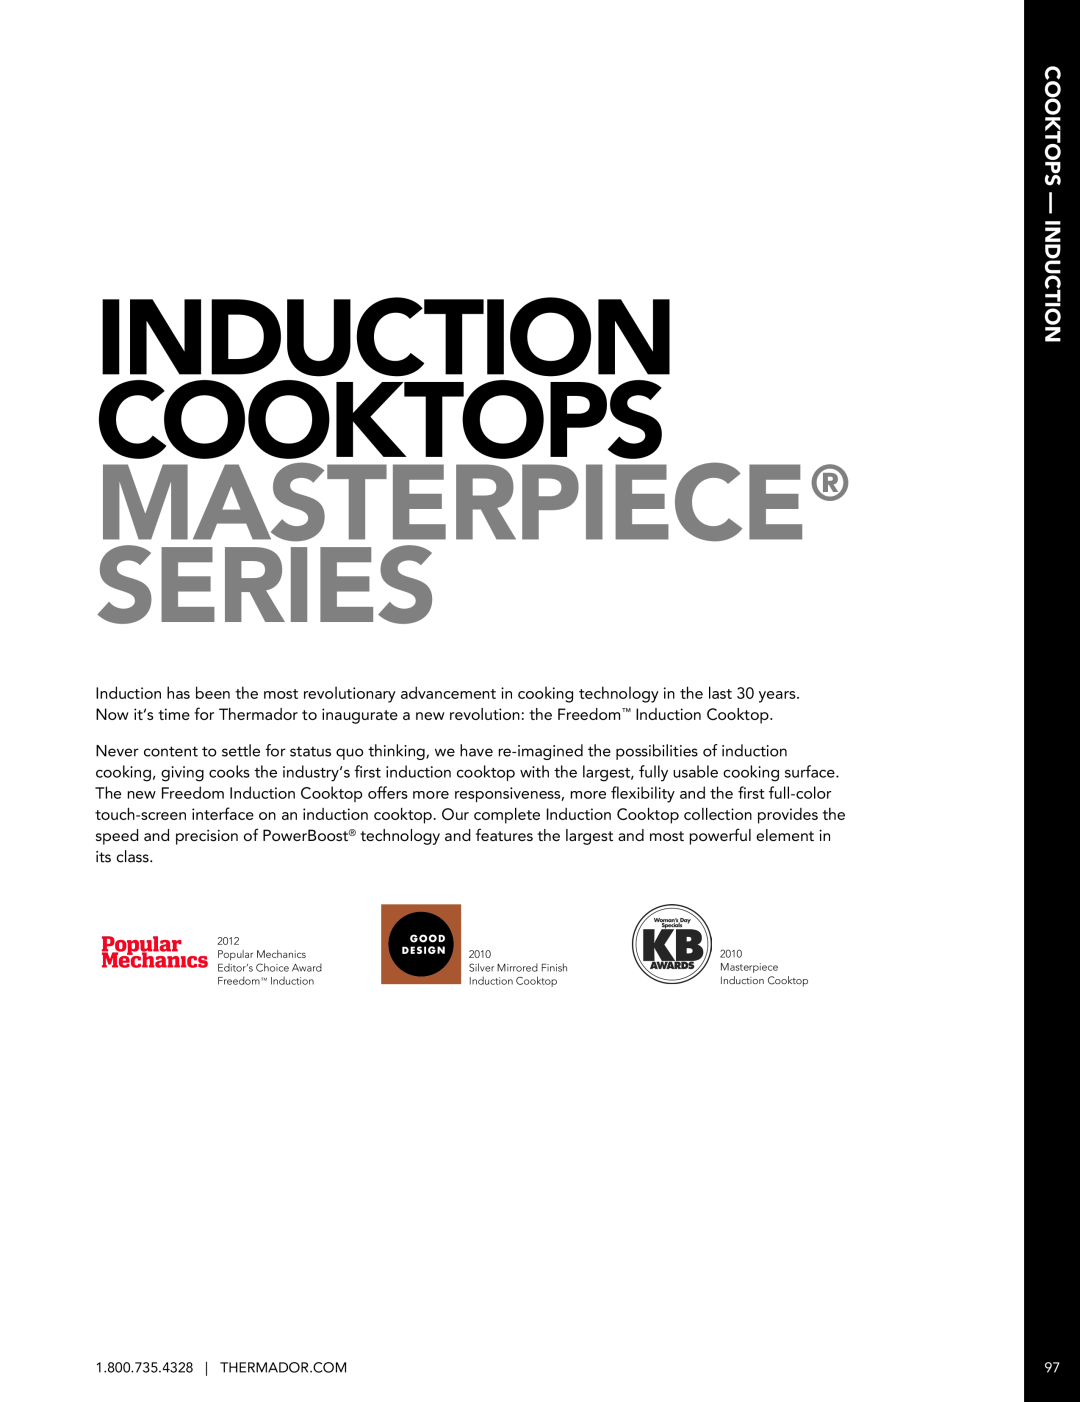 Thermador CIT36XKB manual Cooktops - Induction, Induction Cooktops Masterpiece Series 